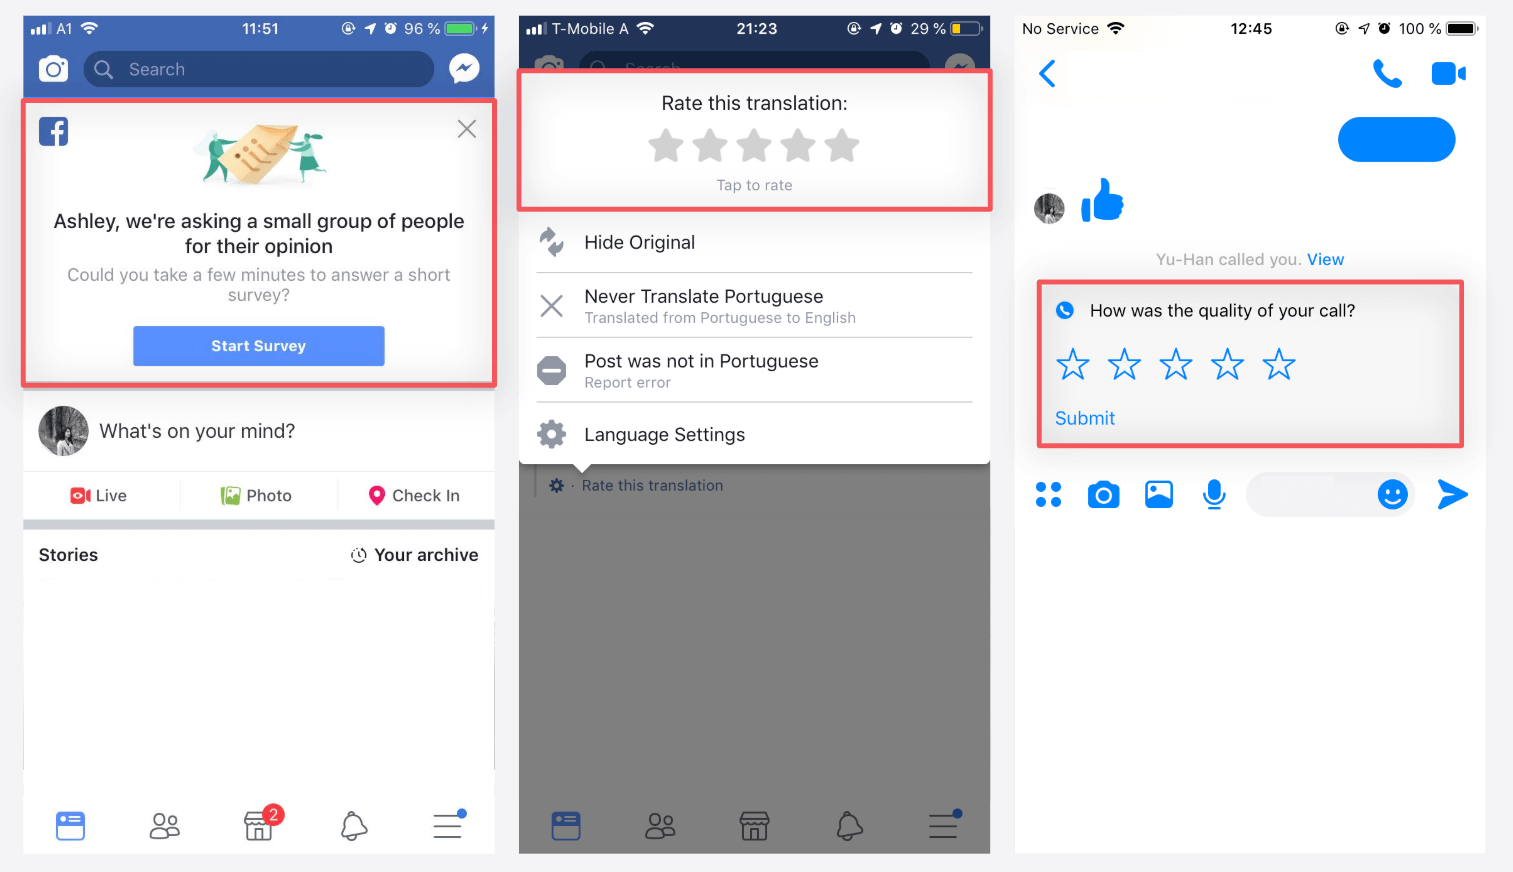 Customer feedback examples on Facebook: user research surveys and satisfaction ratings